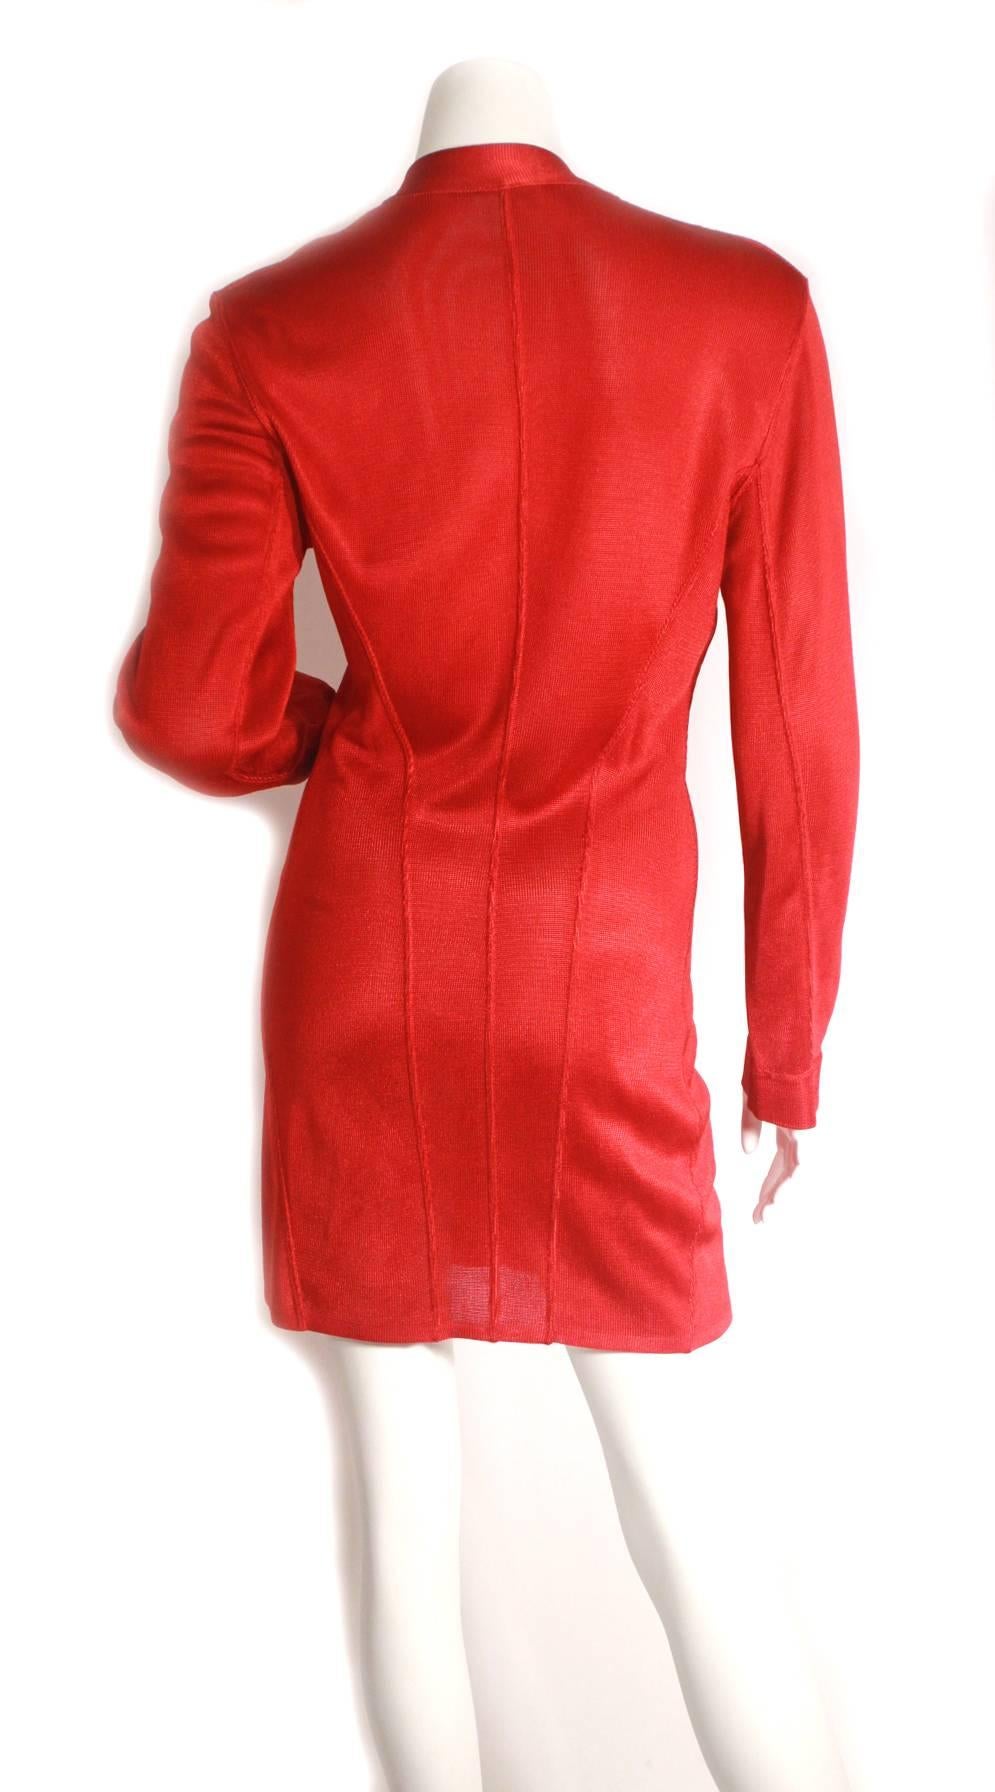 90's Alaia red slinky mini dress. Very low neck line with buttons 5 buttons up with front. Iconic mini and perfect for the fall holiday season!